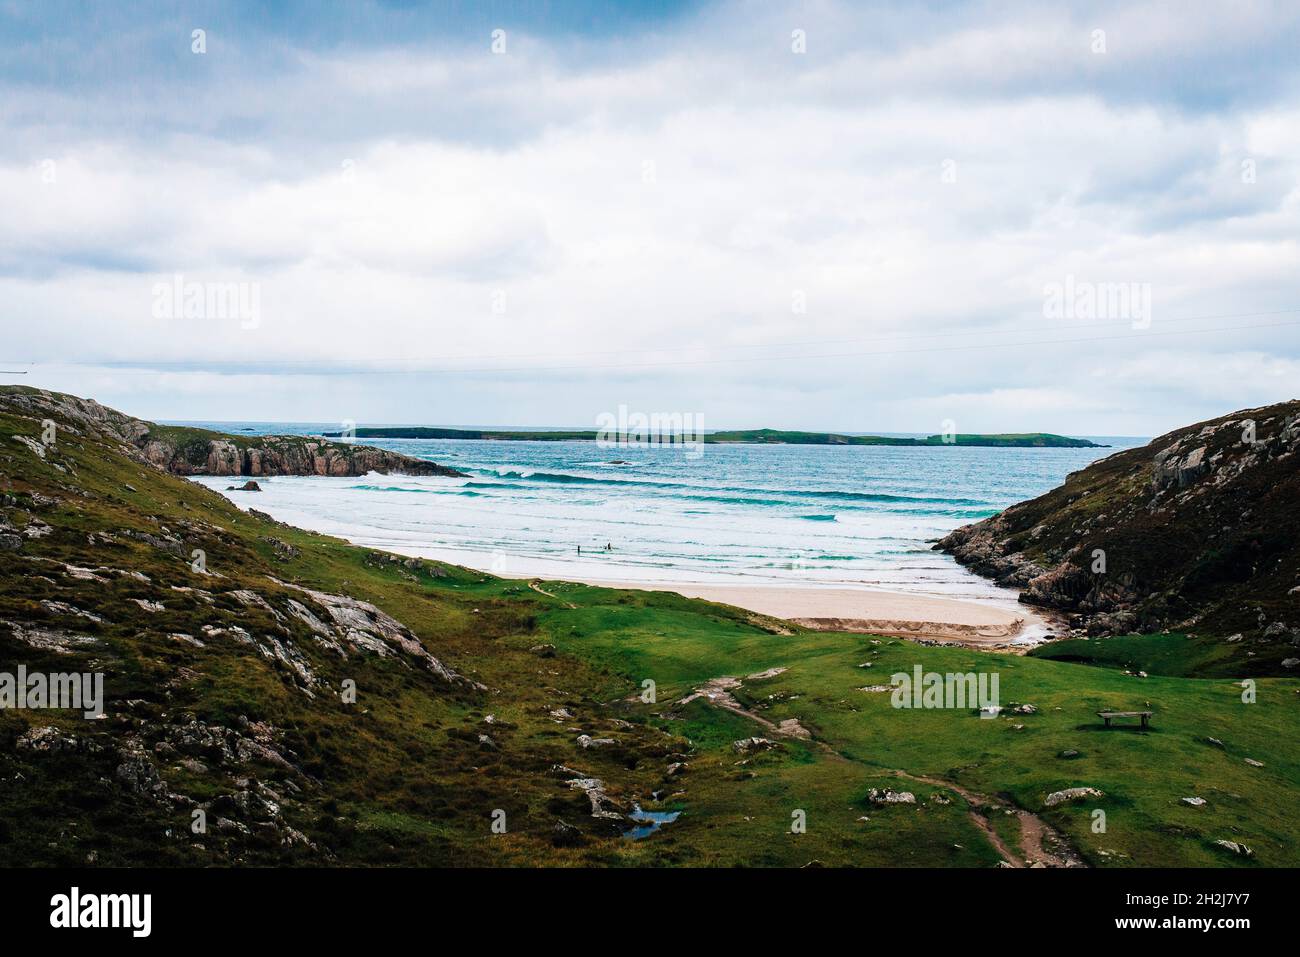 view of CEANNABEINNE BEACH on the nc500 road trip route in scotland Stock Photo